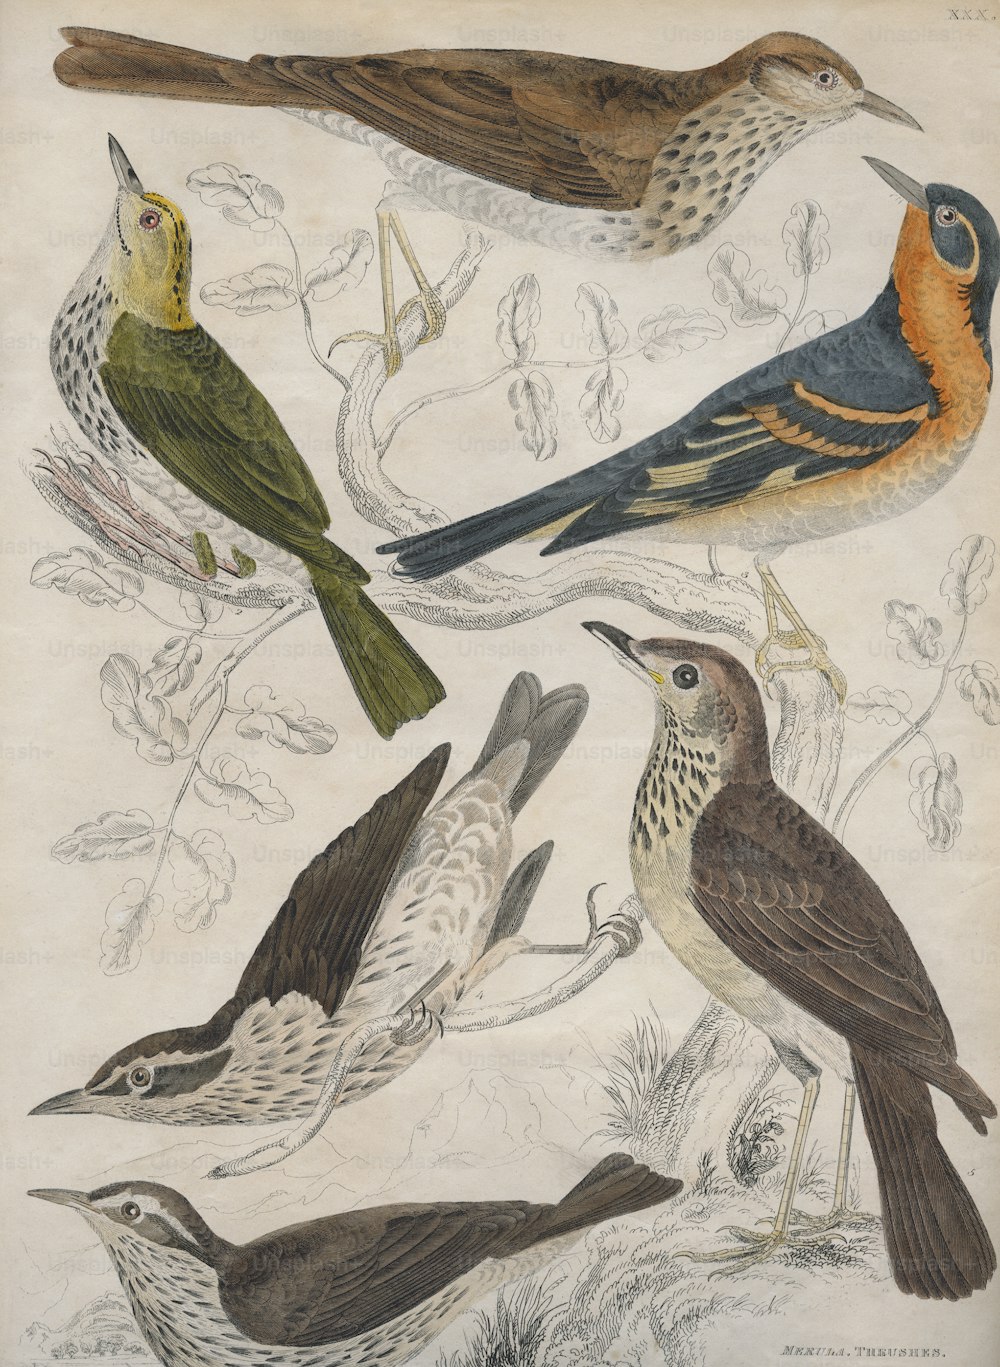 Various thrushes, circa 1850. Clockwise from top, the Little Tawny Thrush (merula minor), Richardson's Thrush (Richardsonii), the Tawny Thrush (Turdus Wilsonii), the Water Thrush (aquatica), Audubon's Thrush (Ludoviciana) and the Golden-Crowned Thrush (auricapilla). Engraved by John Miller after A. Wilson and Captain Brown. (Photo by Hulton Archive/Getty Images)